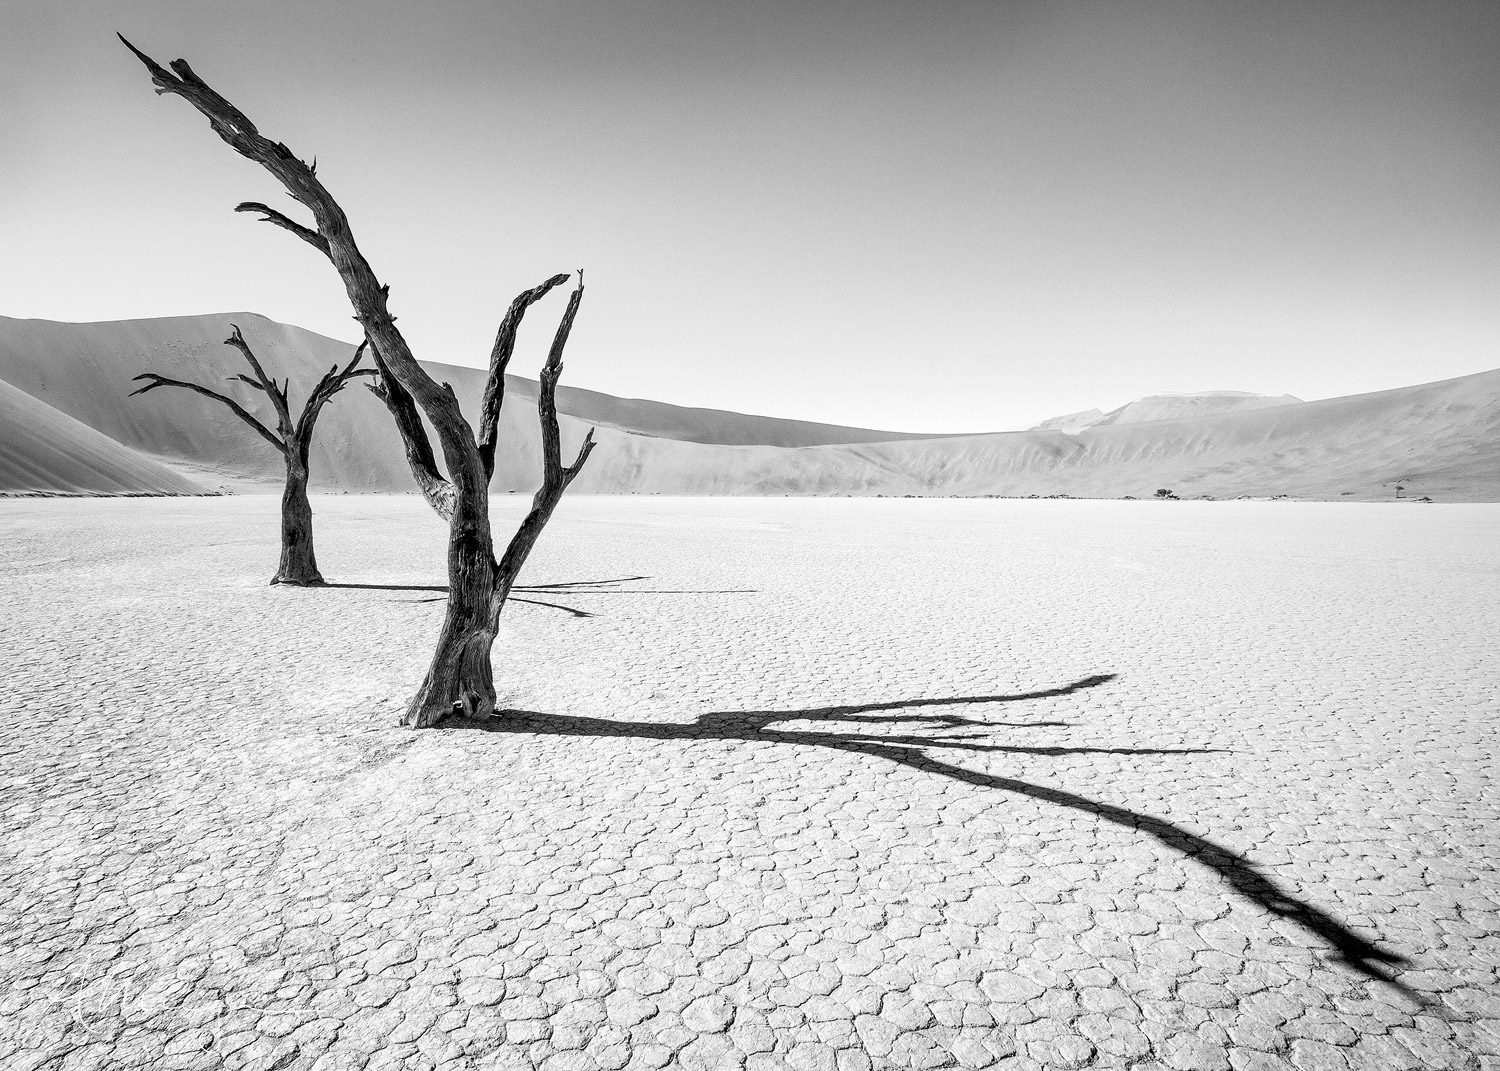 An artistic monochrome composition of Acacia trees in the Deadvlei pan in Sossusvlei, part of the Namib-Naukluft National Park